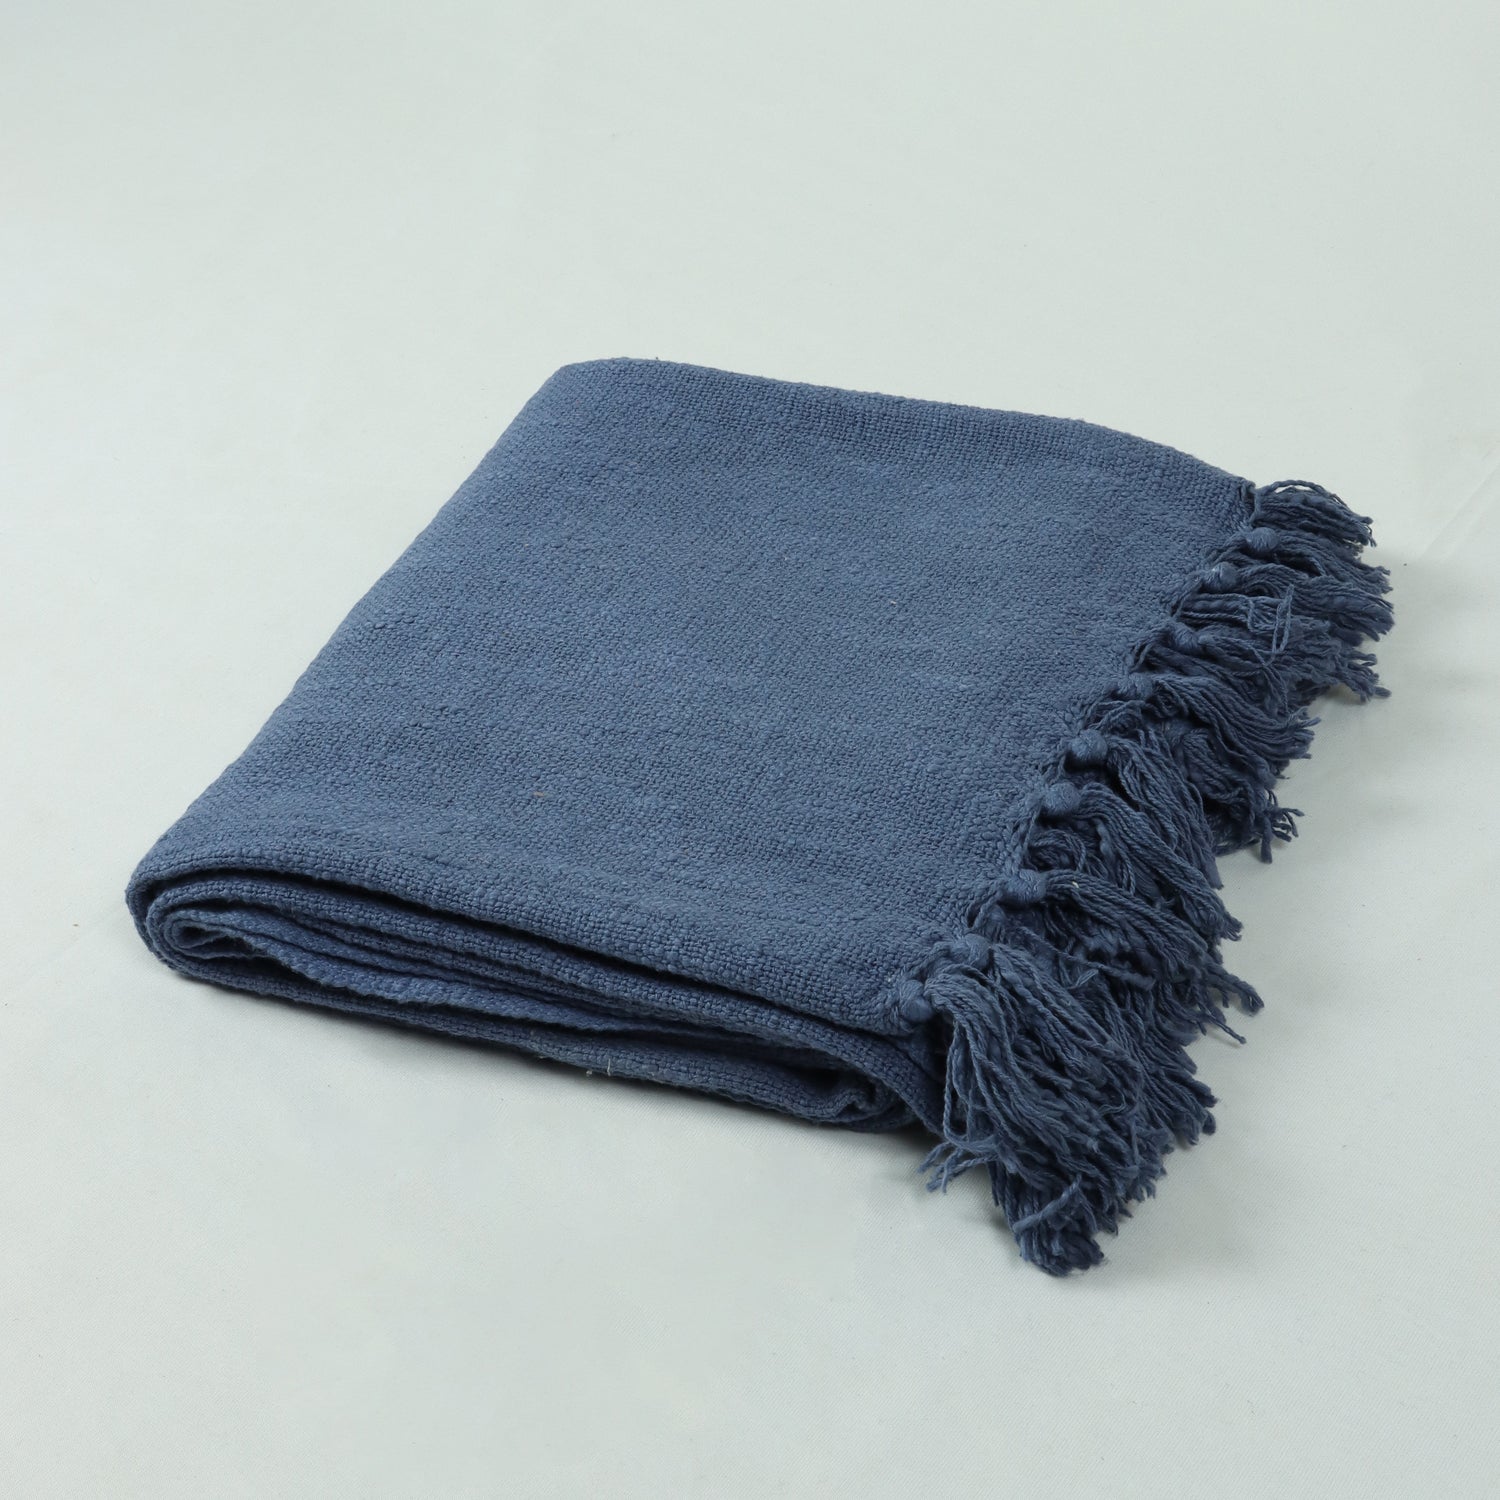 Blue Solid Soft Cotton Home Decorative Woven Throw Blanket